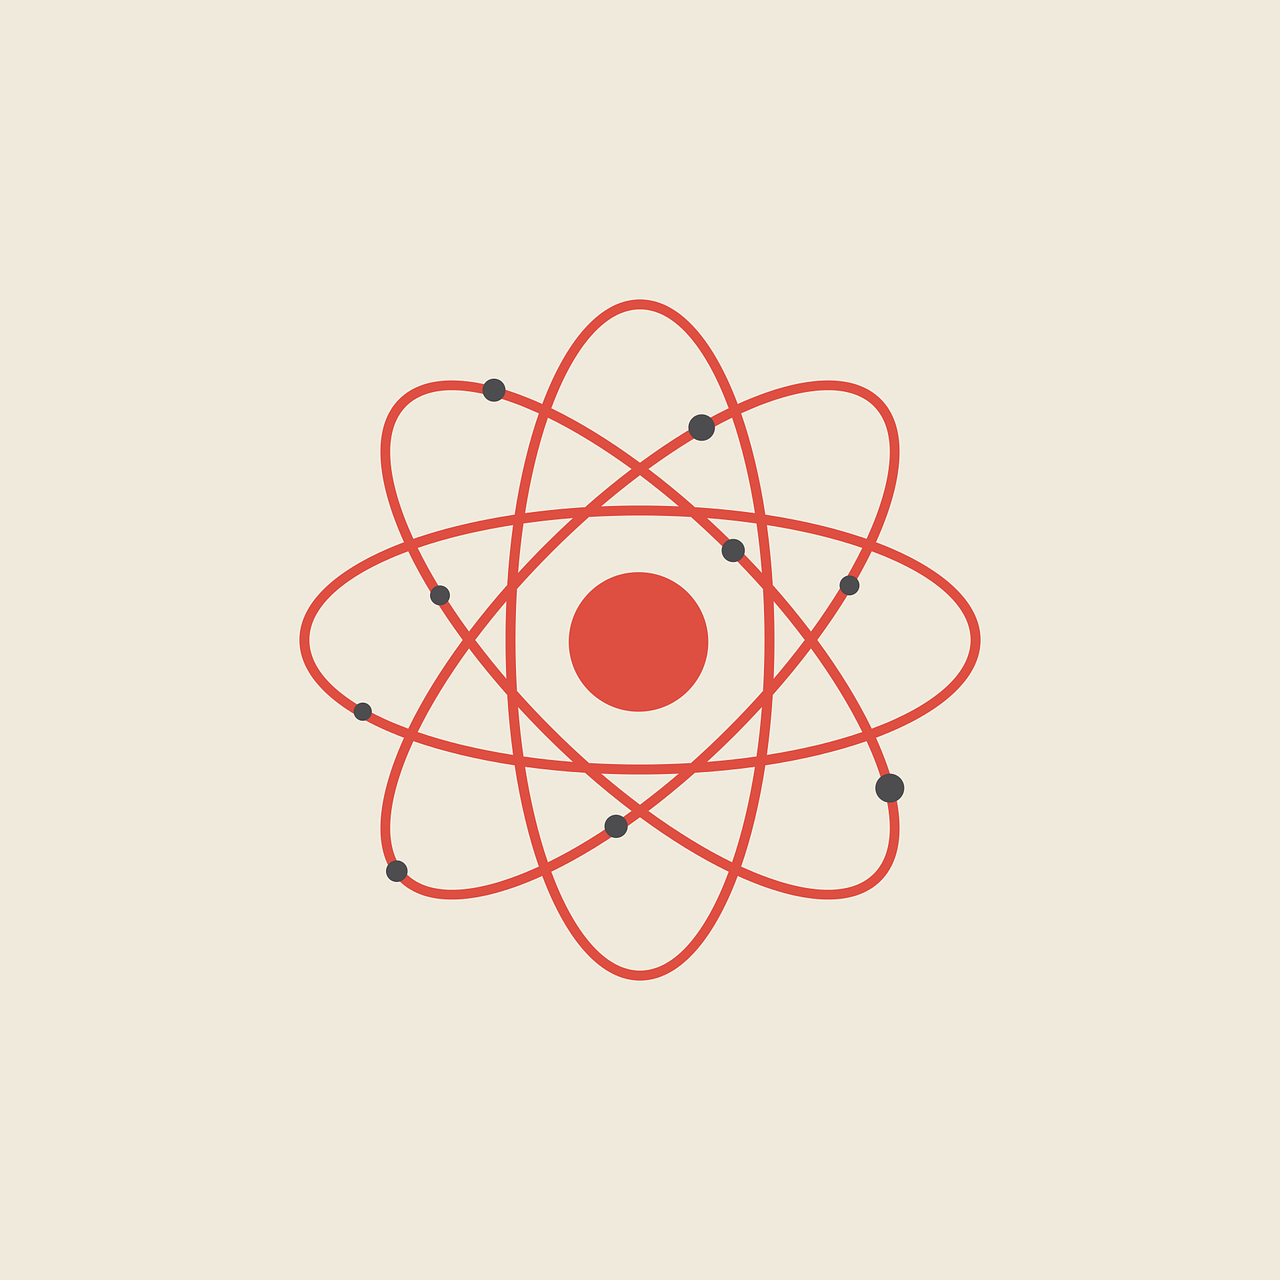 An image of a red atom with black dots.